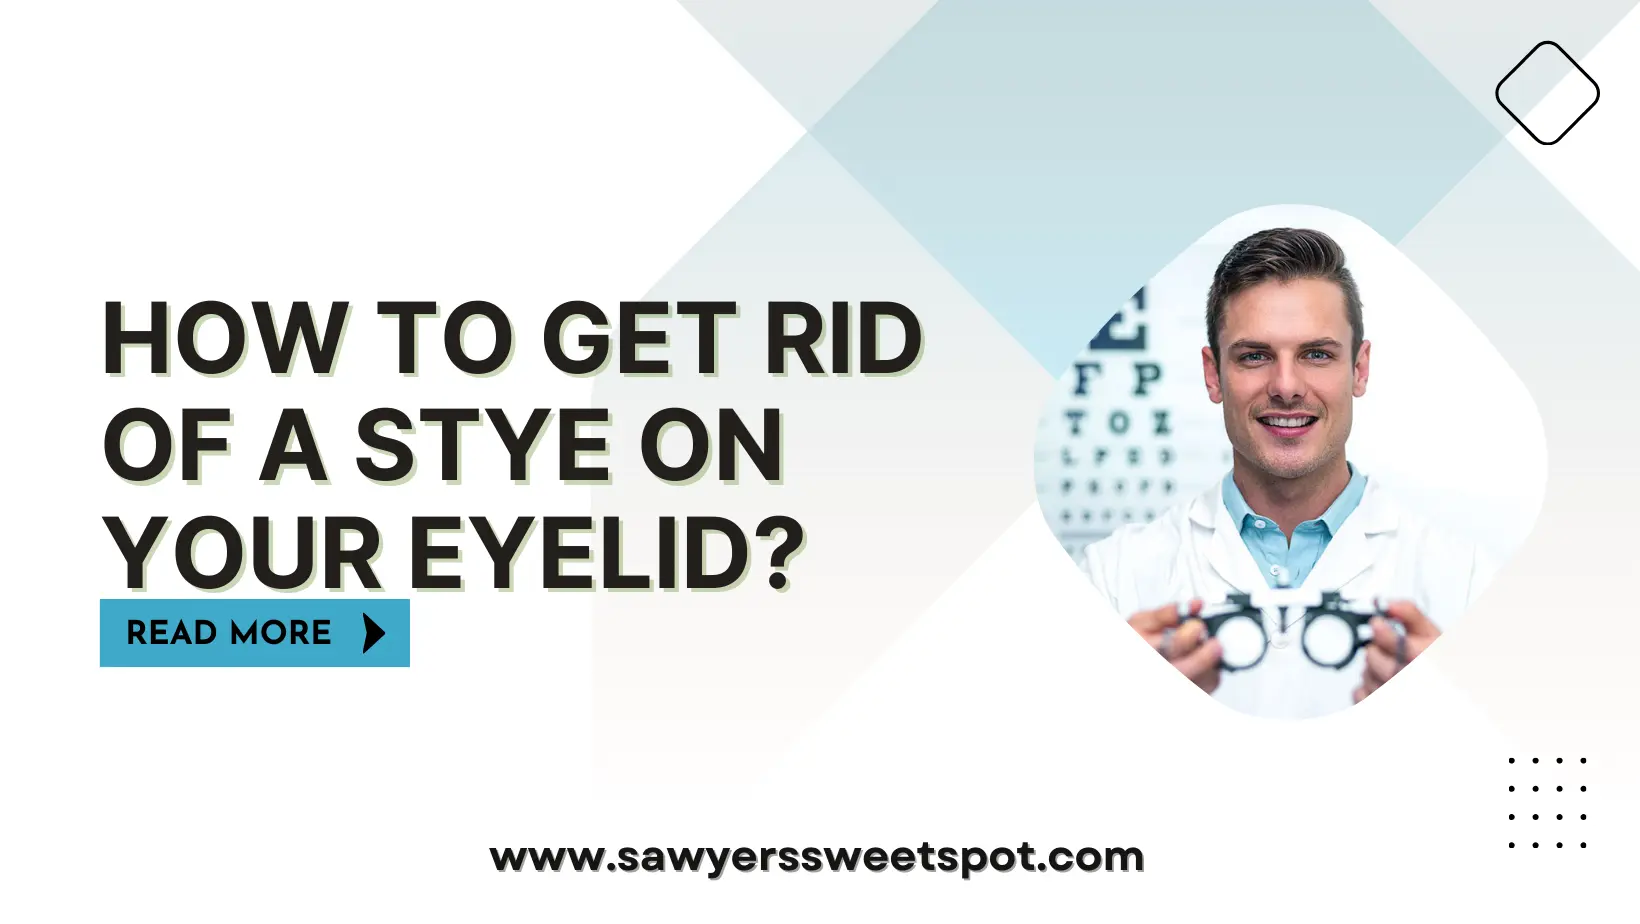 How to Get Rid of a Stye on your Eyelid?